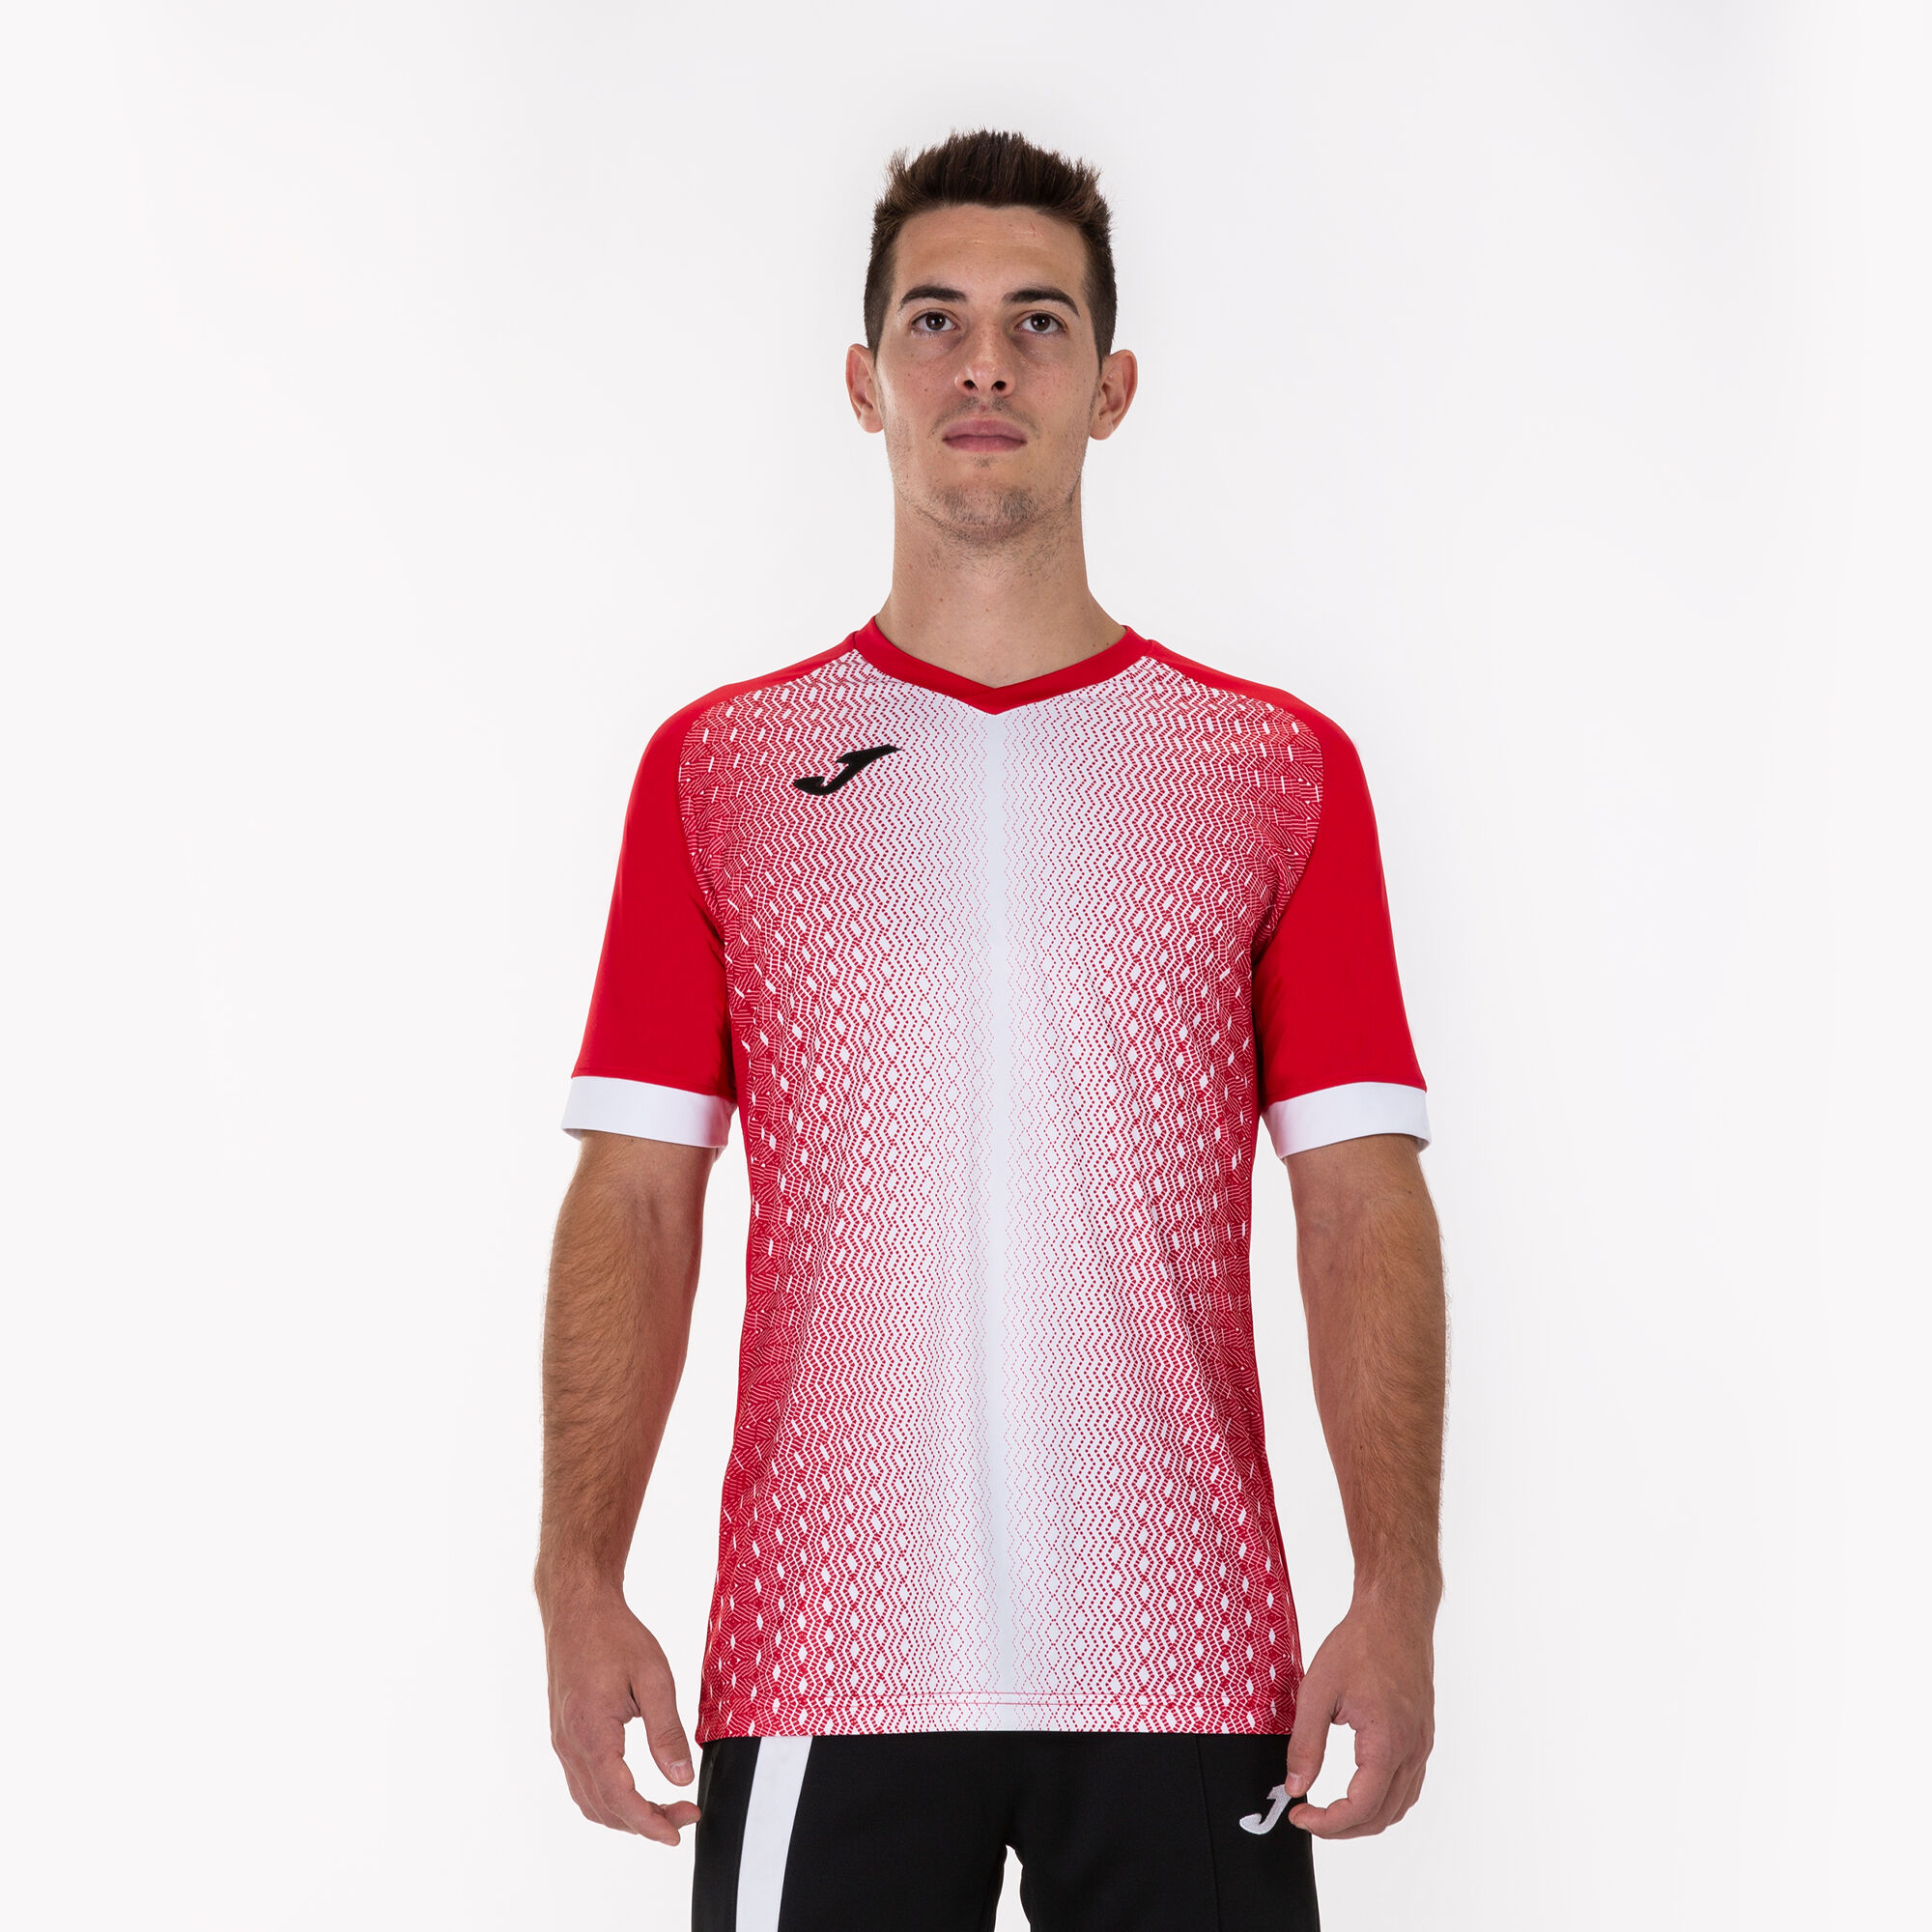 MAILLOT MANCHES COURTES HOMME SUPERNOVA ROUGE BLANC